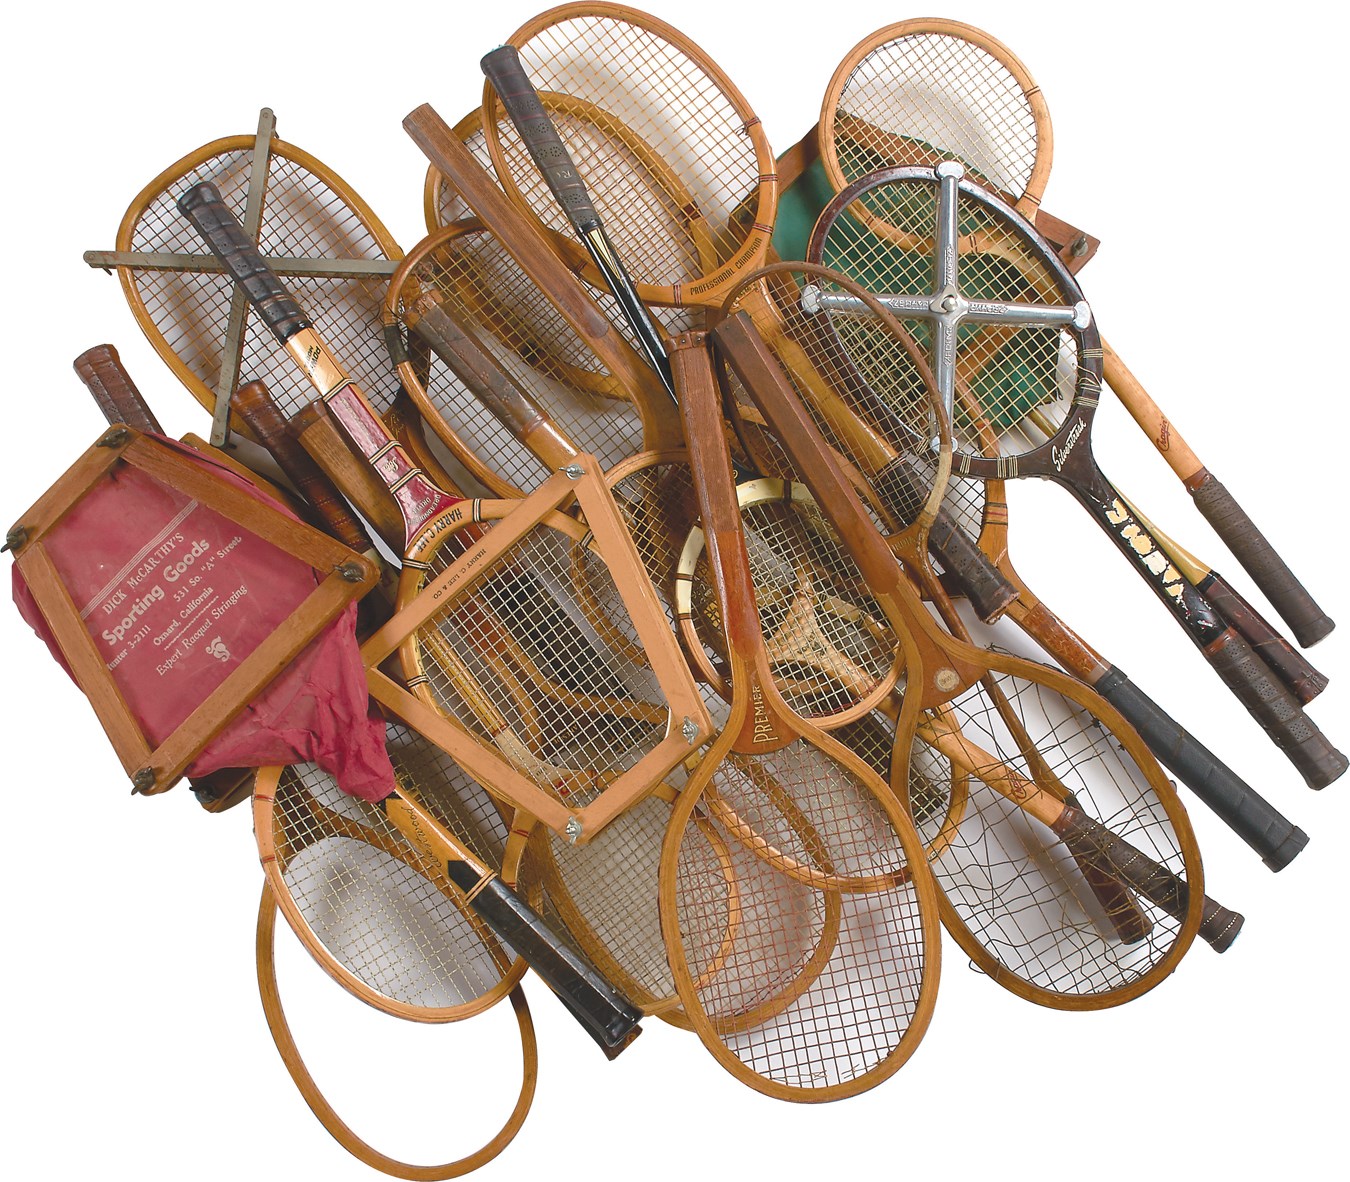 Fine Early Tennis Racquet Collection (100+)